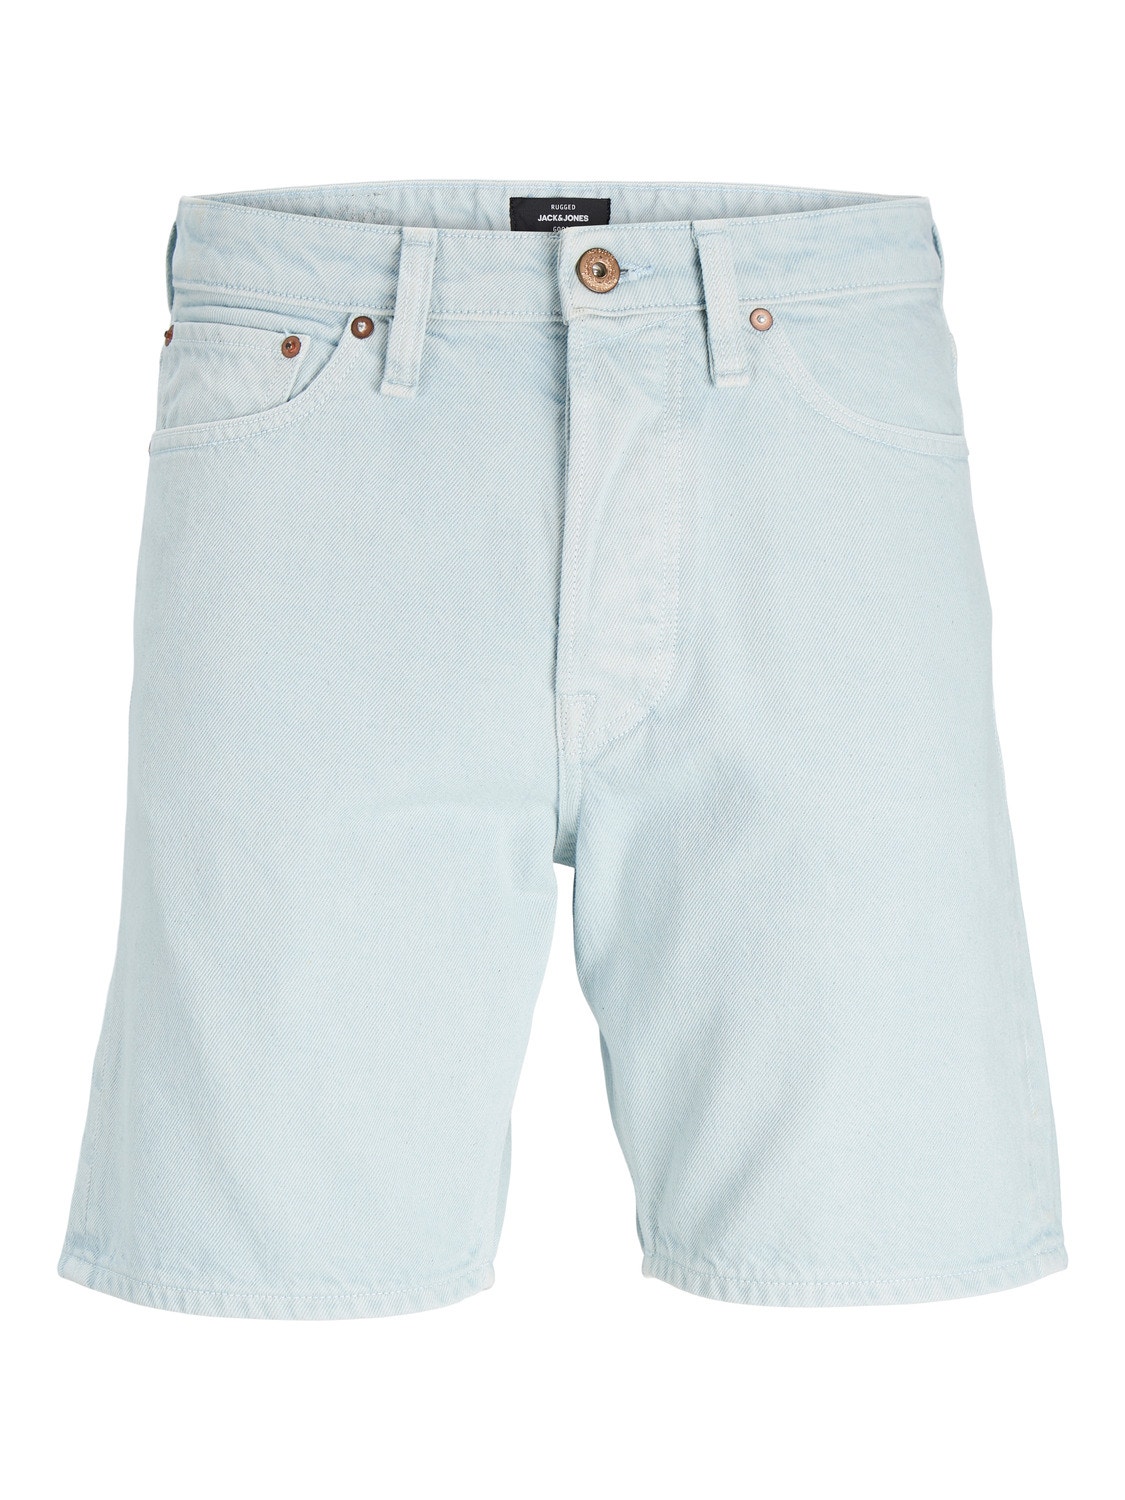 Jack & Jones Relaxed Fit Jeans Shorts -Blue Glow - 12249035